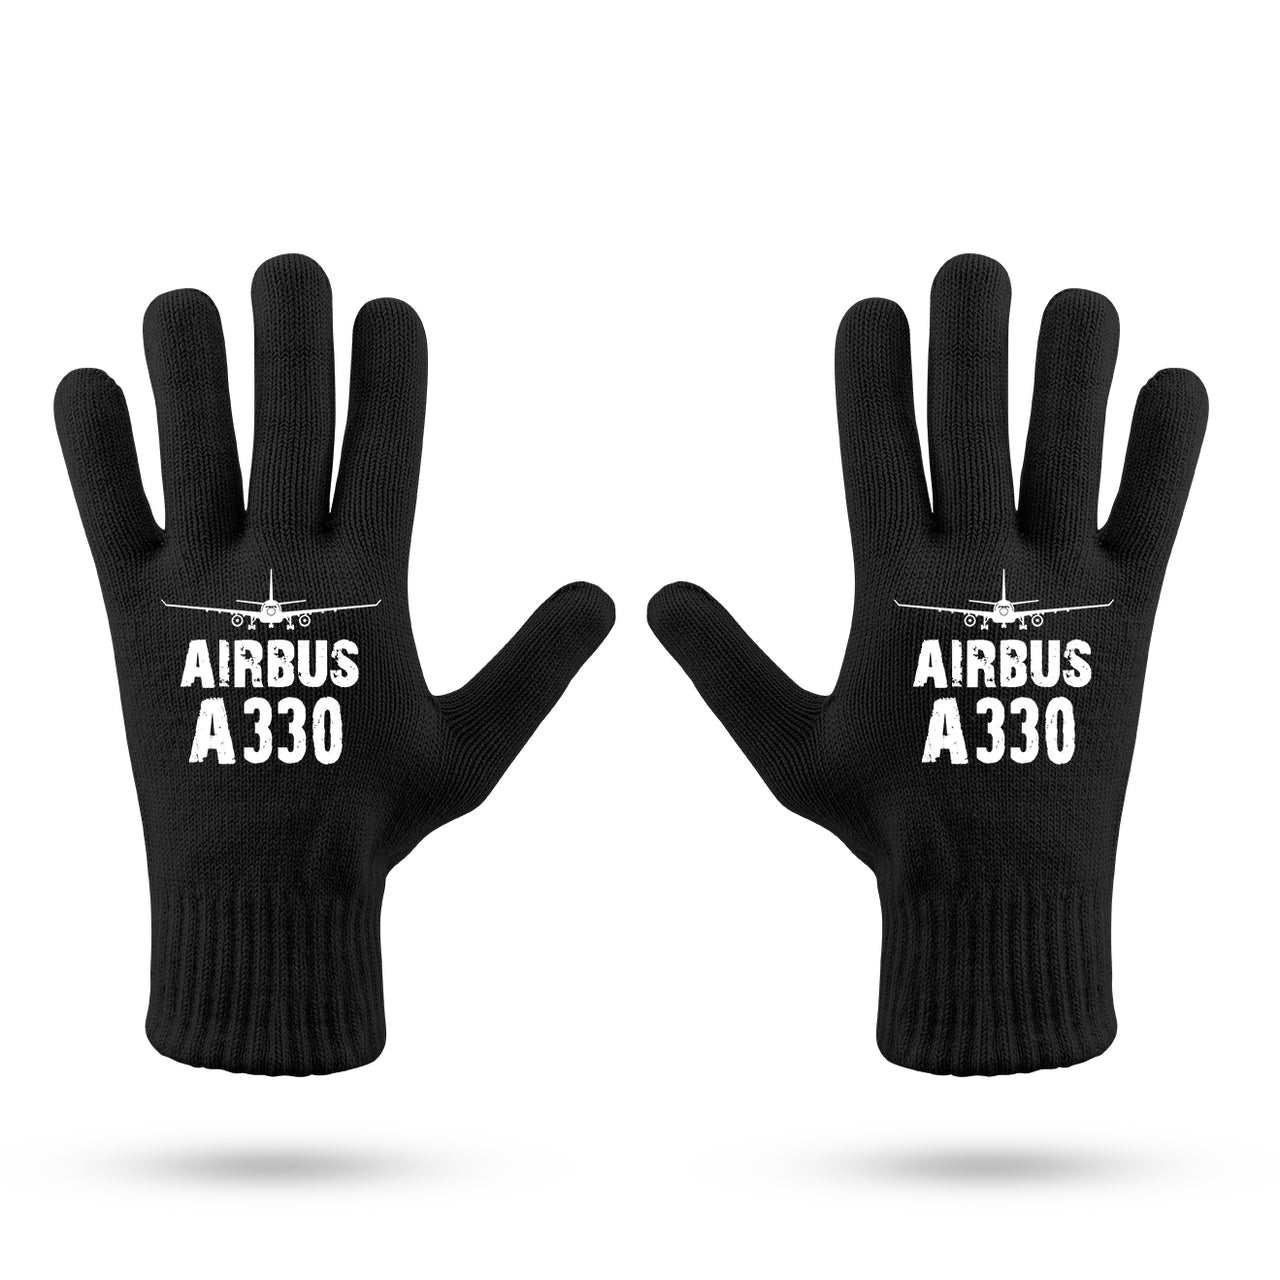 Airbus A330 & Plane Designed Gloves